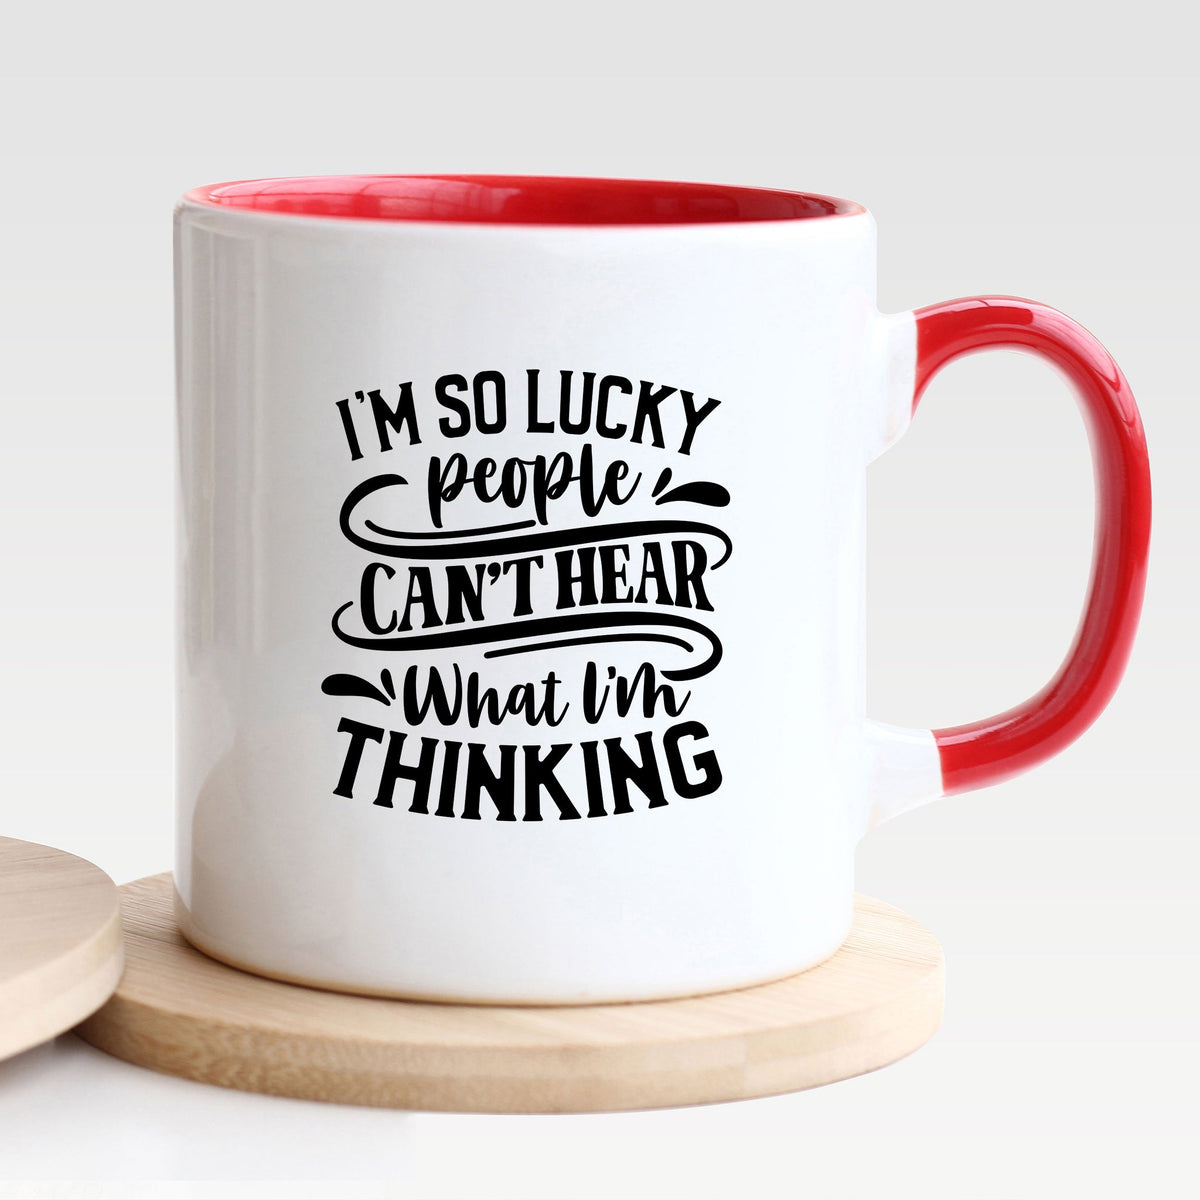 I'm So Lucky People Can't Hear What I'm Thinking - Mug